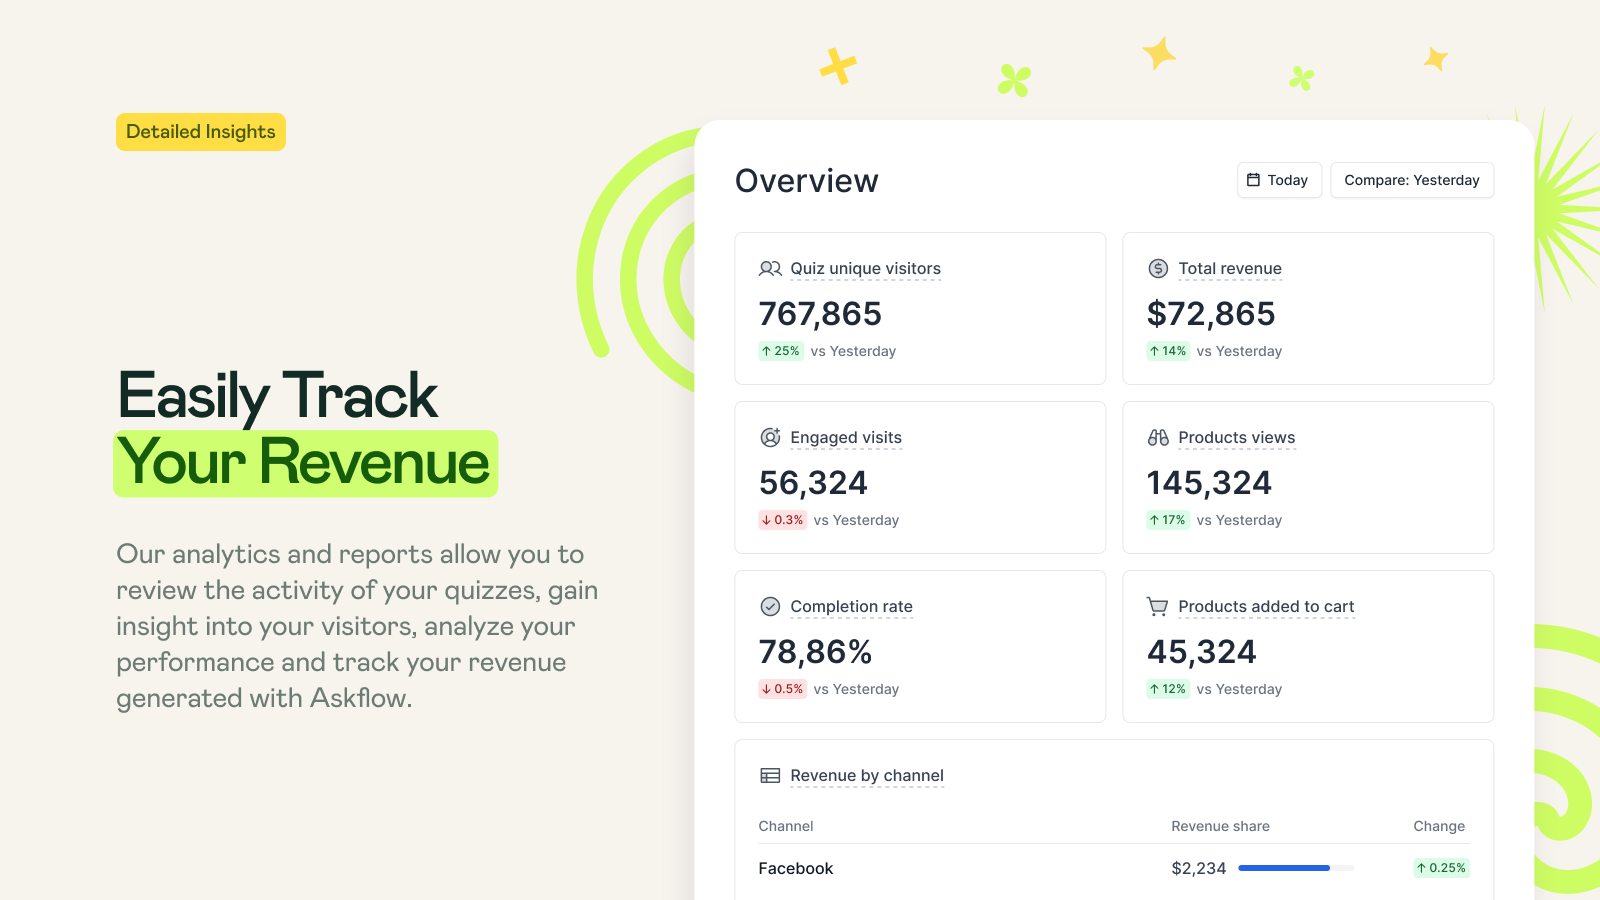 Easily Track Your Revenue